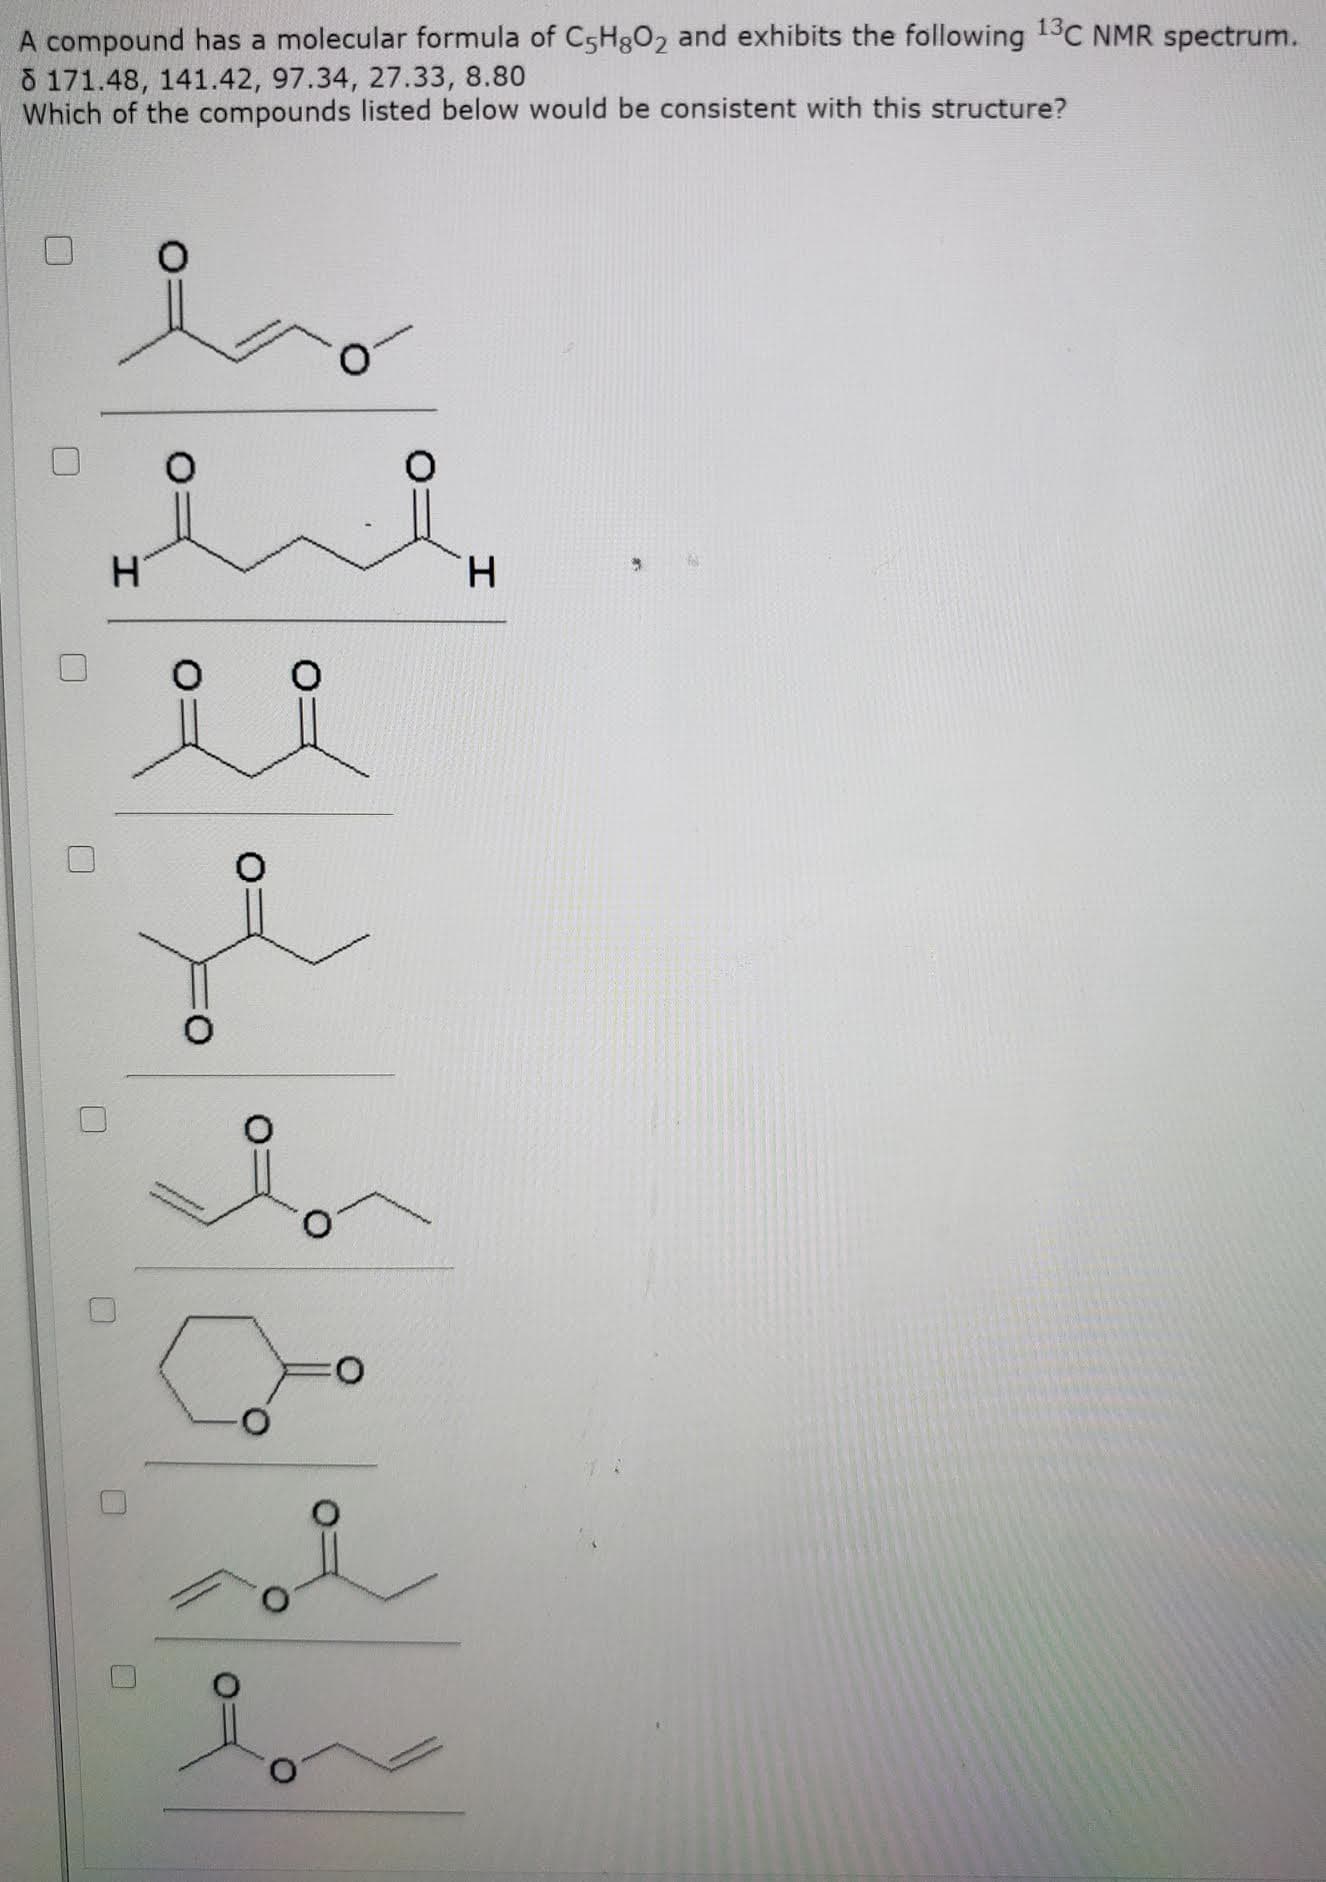 A compound has a molecular formula of C5H802 and exhibits the following 13C NMR spectrum.
8 171.48, 141.42, 97.34, 27.33, 8.80
Which of the compounds listed below would be consistent with this structure?
